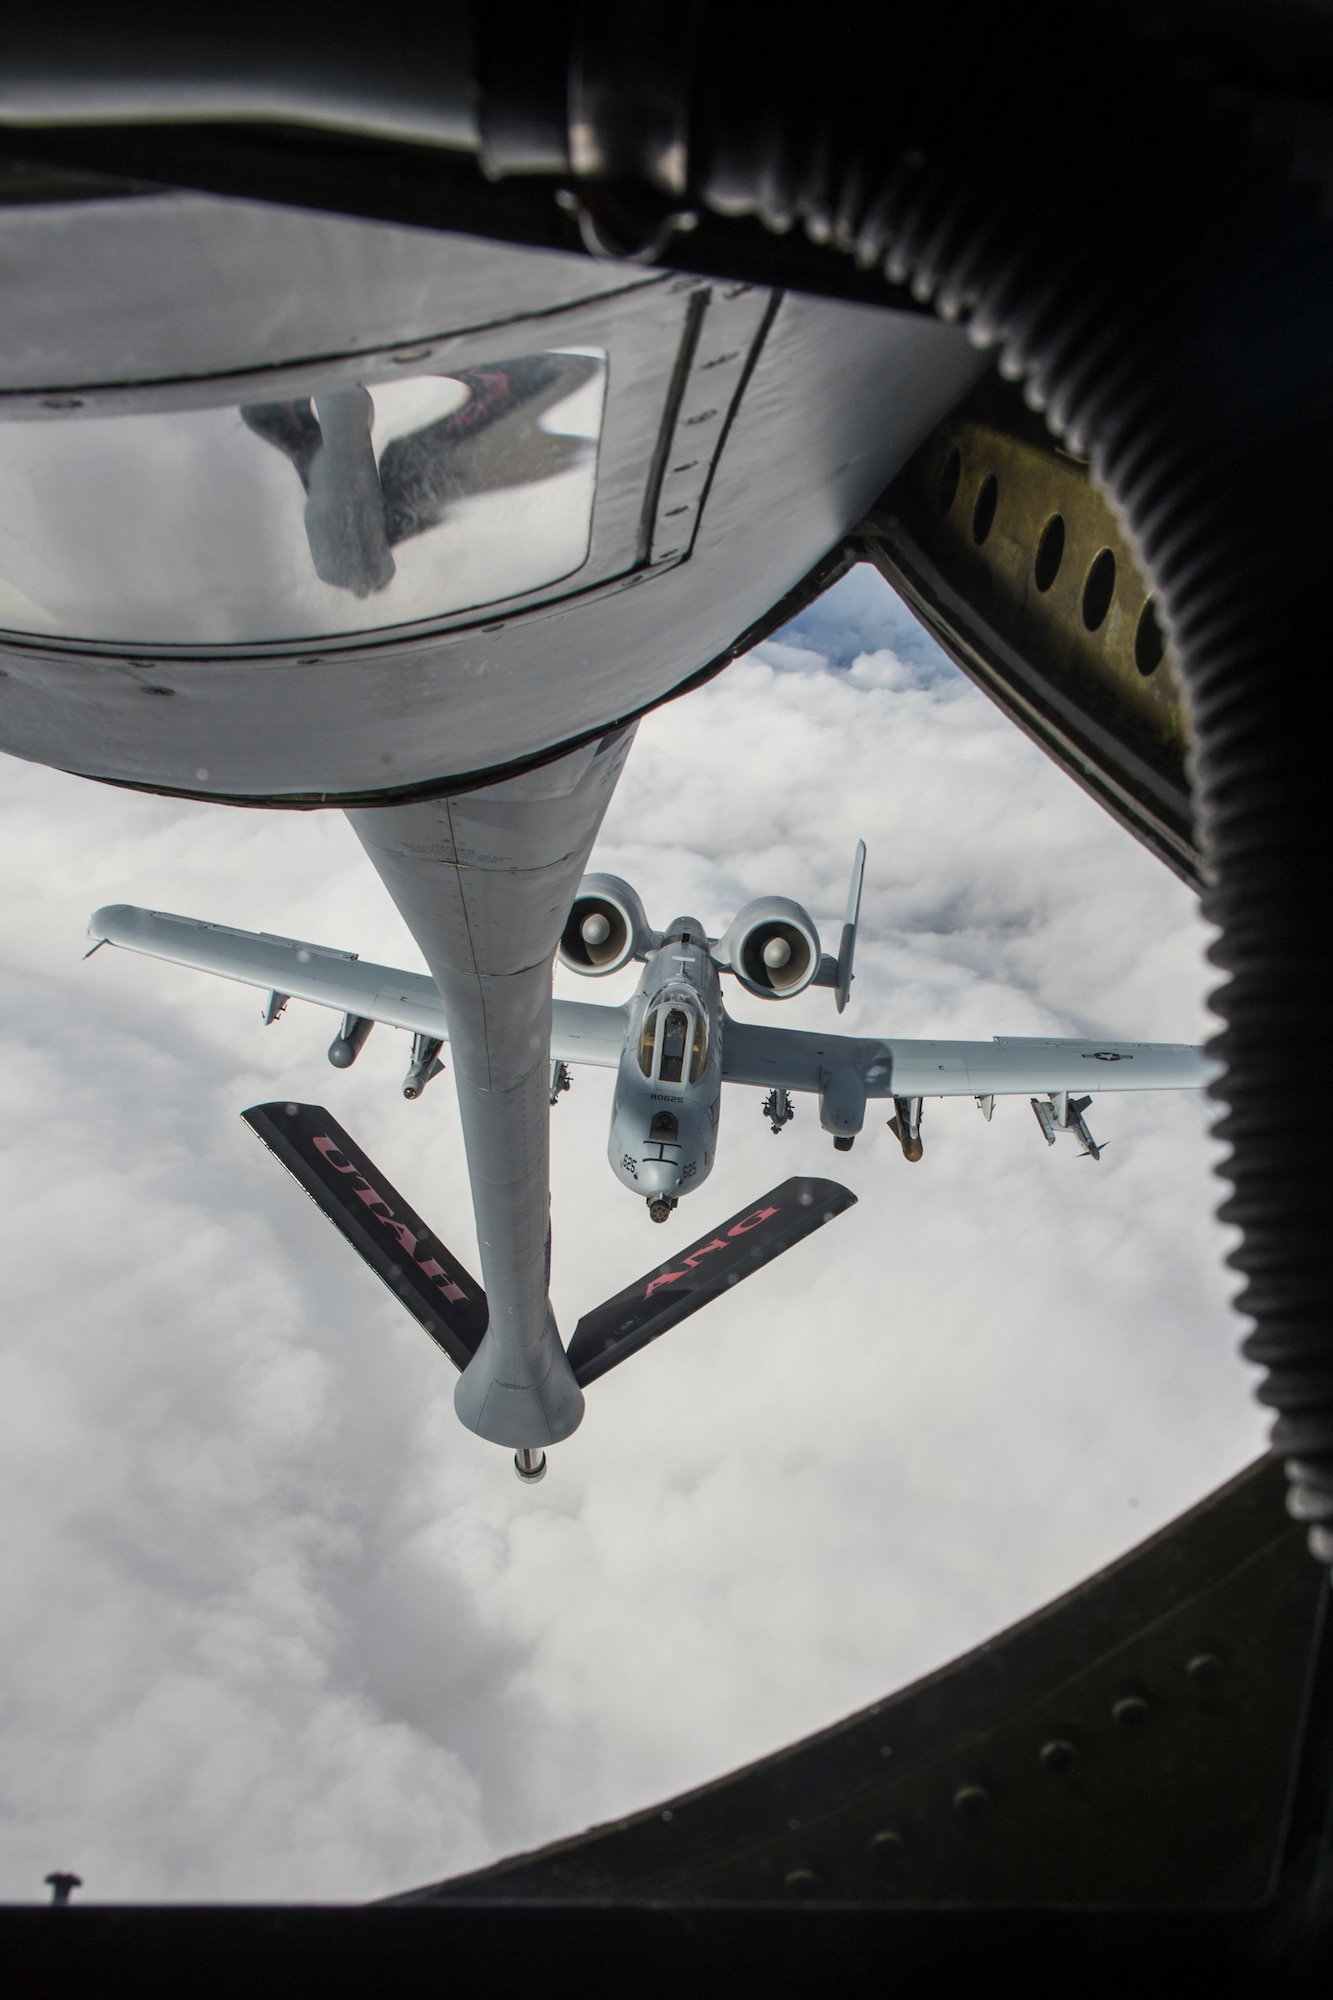 A KC-135 Stratotanker assigned to the Utah Air National Guard’s 151st Air Refueling Wing refuels an A-10 Thunderbolt || assigned to the 190th Fighter Squadron, over Southwest Idaho, Dec. 7, 2019. The Idaho and Utah Air National Guard units collaborated to support an in-flight refueling experience for spouses of Airmen from the 124th Fighter Wing. (U.S. Air National Guard photo by Airman 1st Class Taylor Walker)